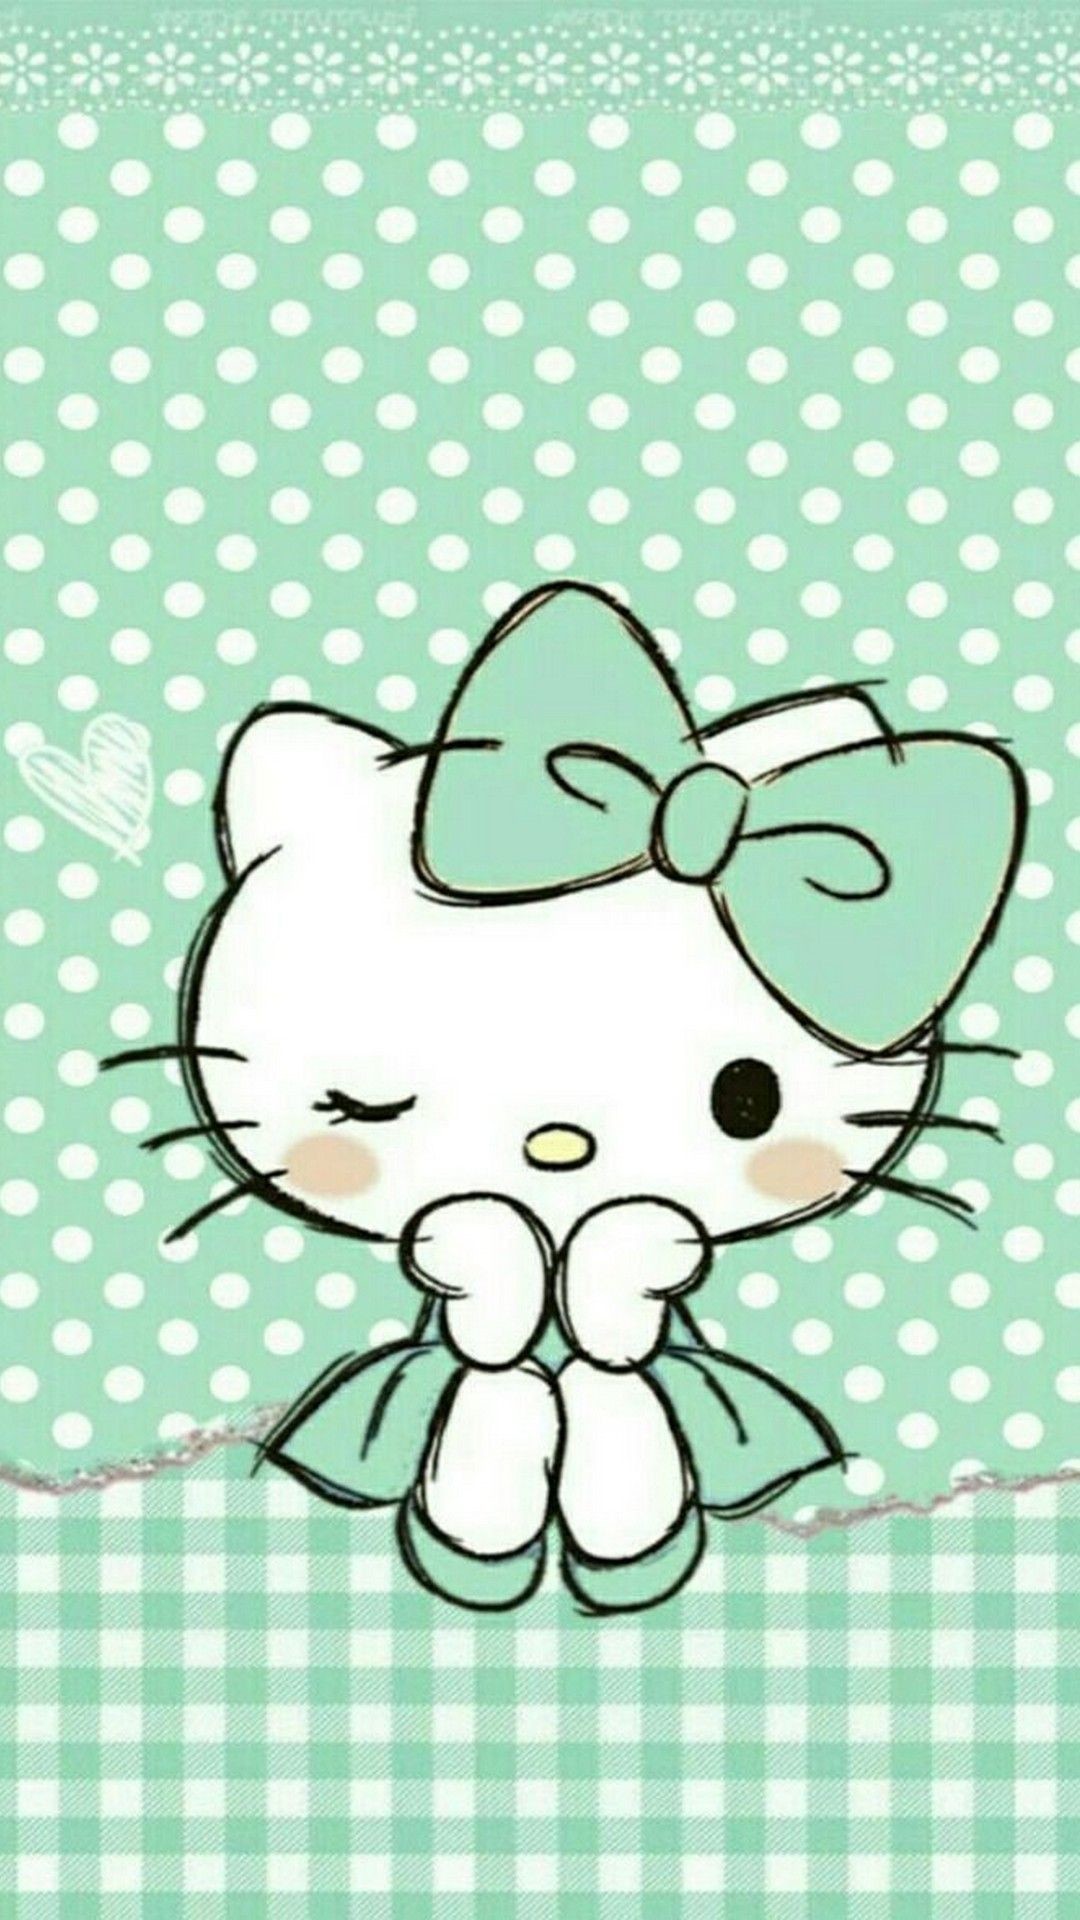 1080x1920 Hello Kitty Wallpaper For Android - Best Android Wallpapers